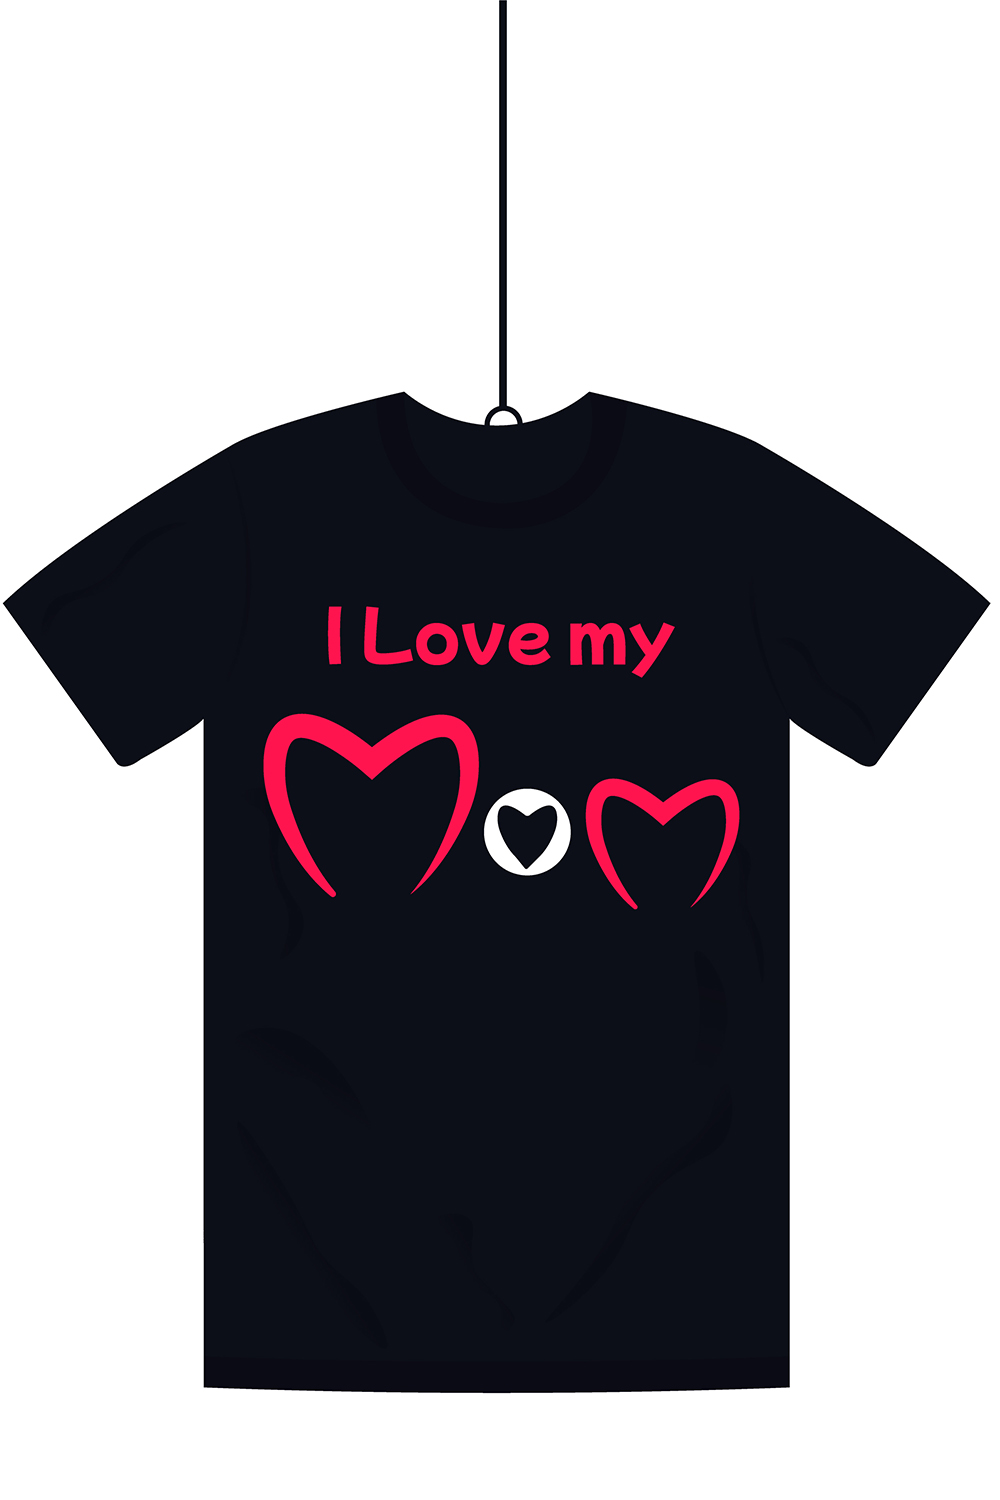 I Love You Mom Happy Mothers Day T-shirt design with heart shape pinterest preview image.